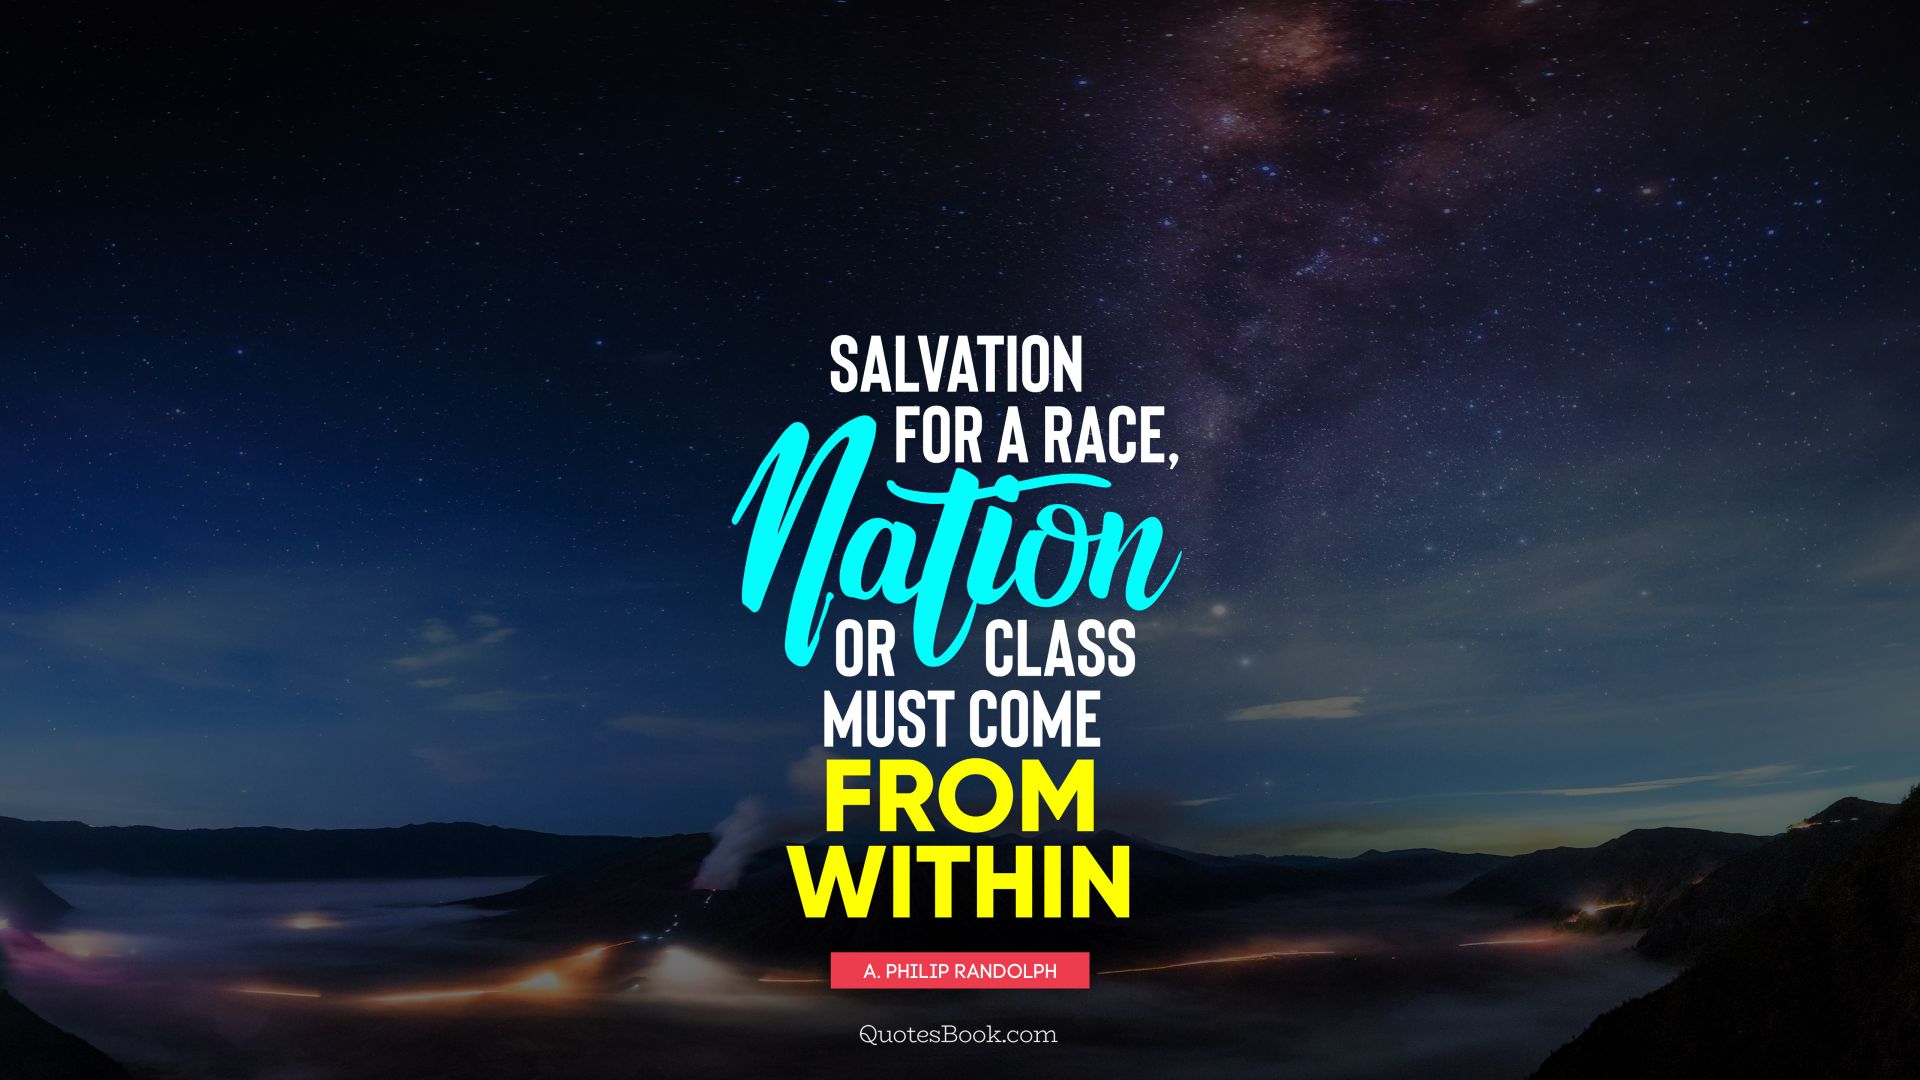 Salvation for a race, nation or class must come from within. - Quote by A. Philip Randolph